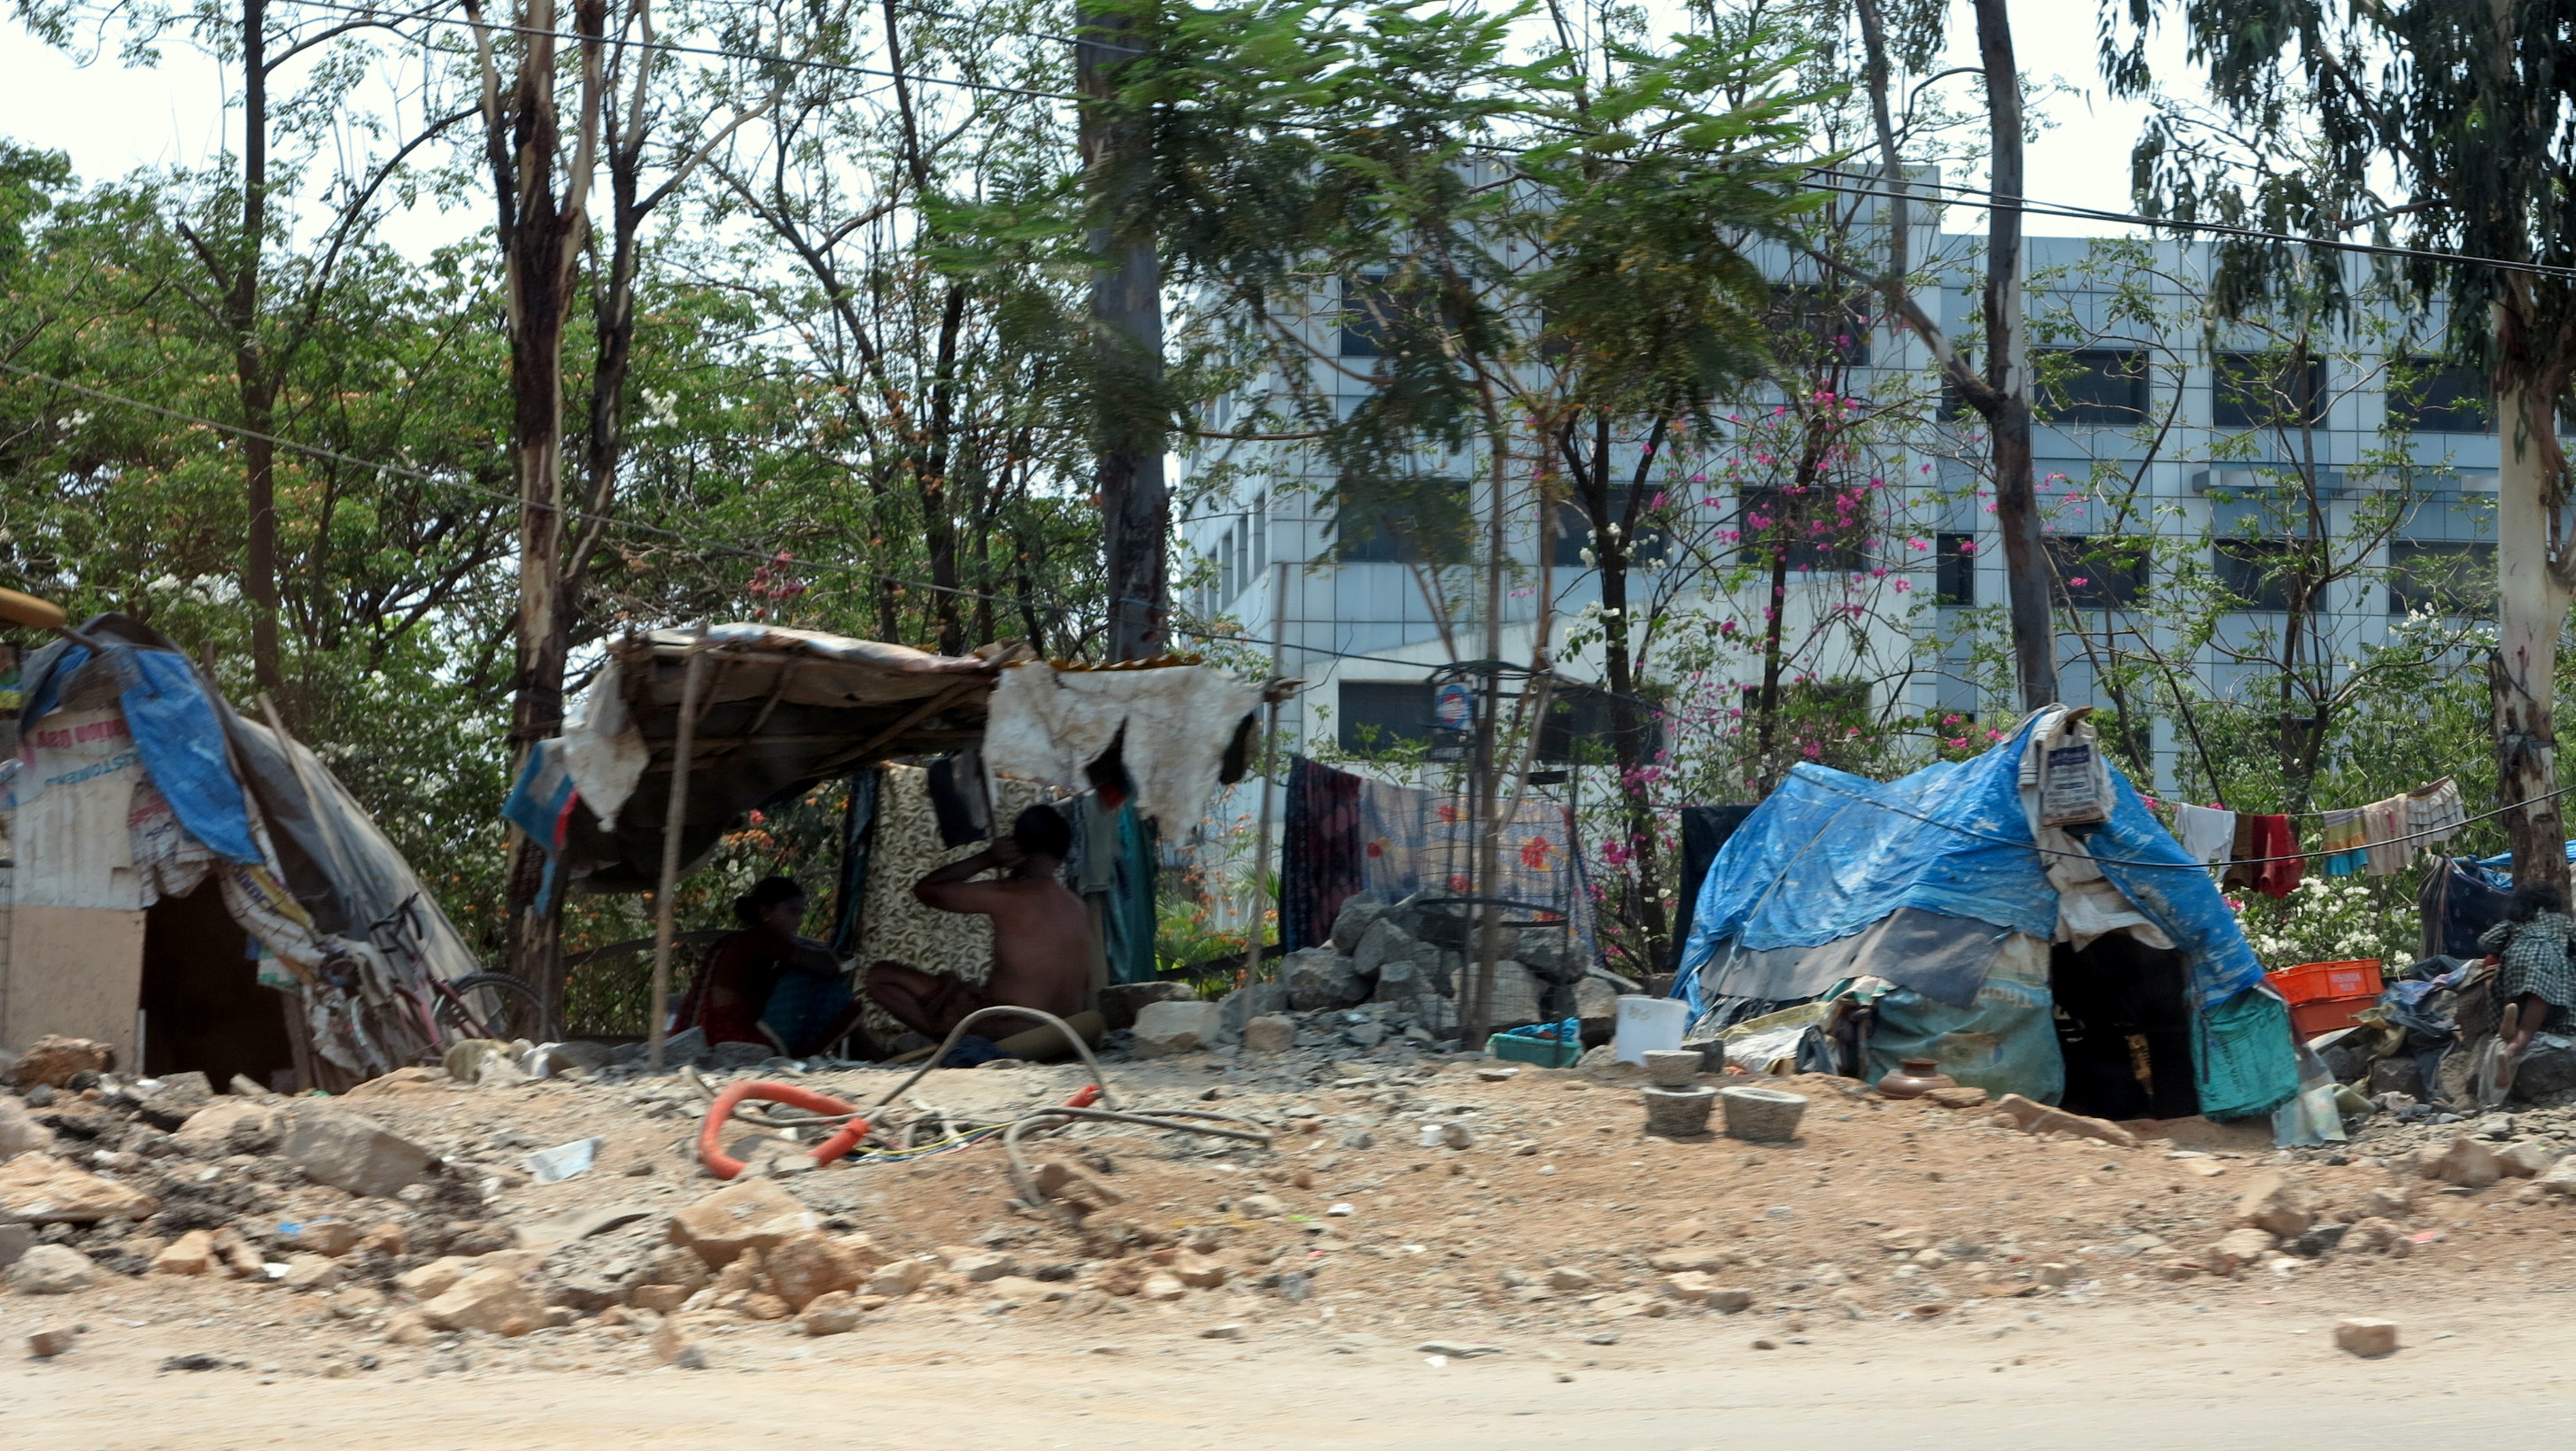 Tents by roadside, Hyderabad